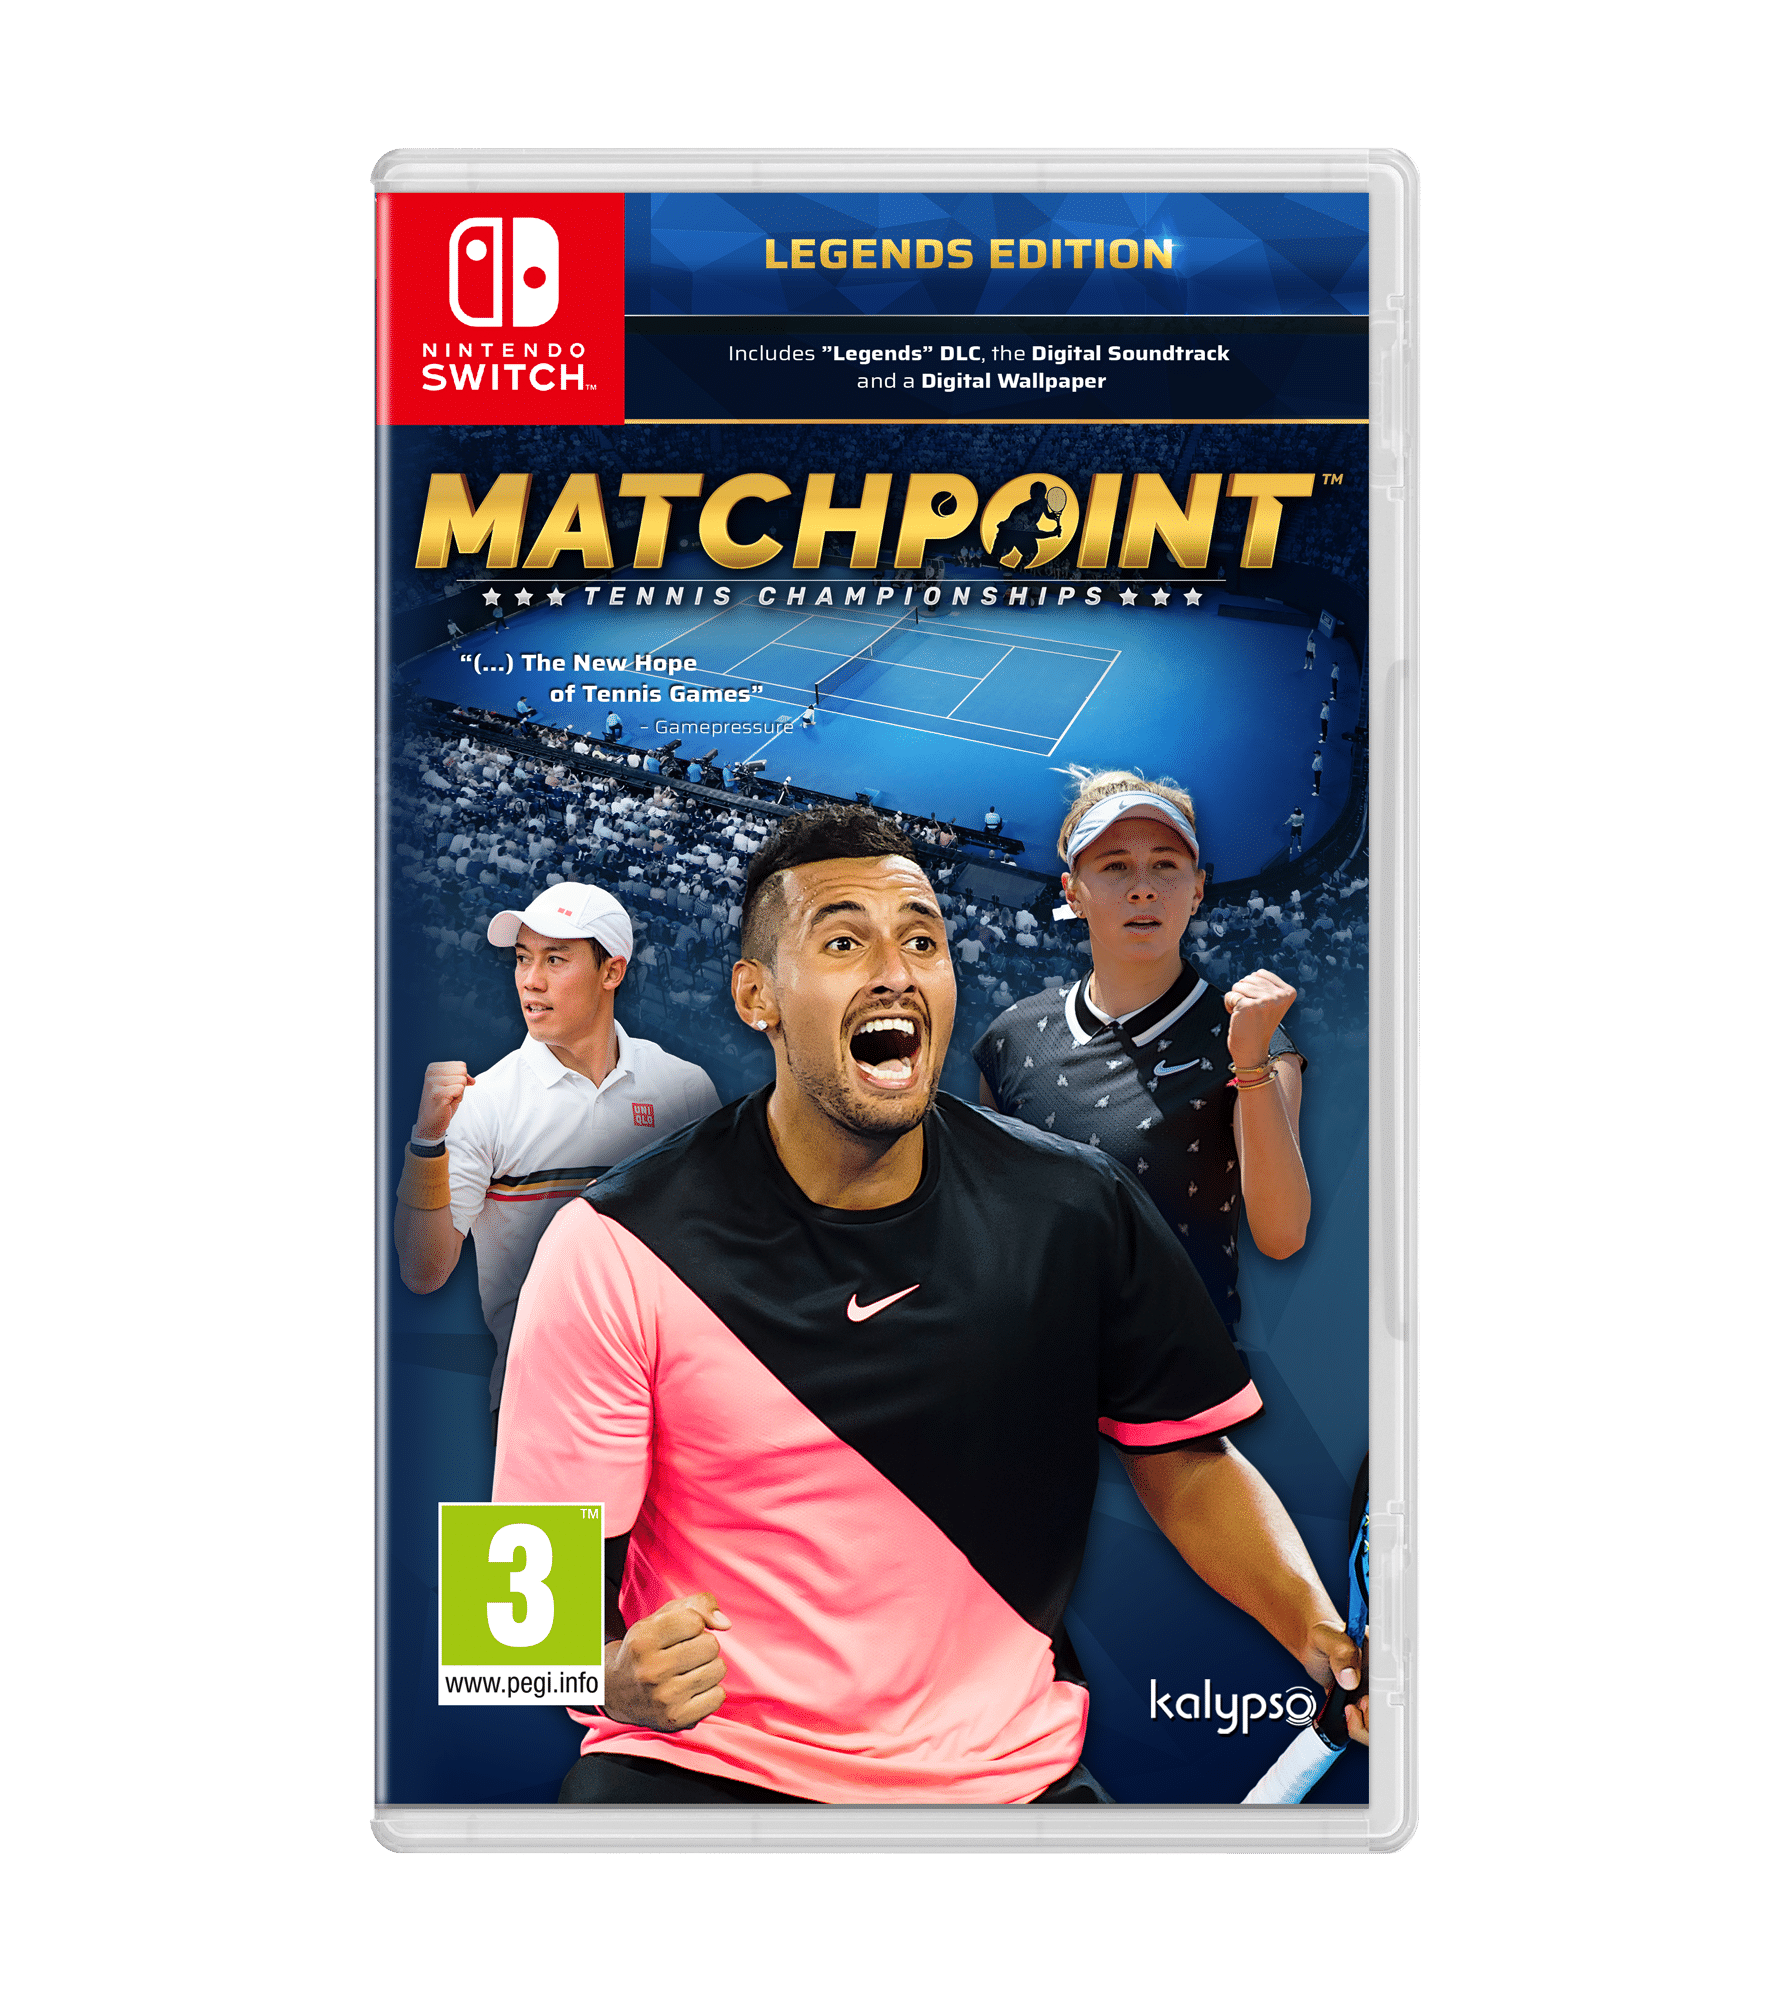 matchpoint-tennis-championships-legends-edition-nintendo-switch